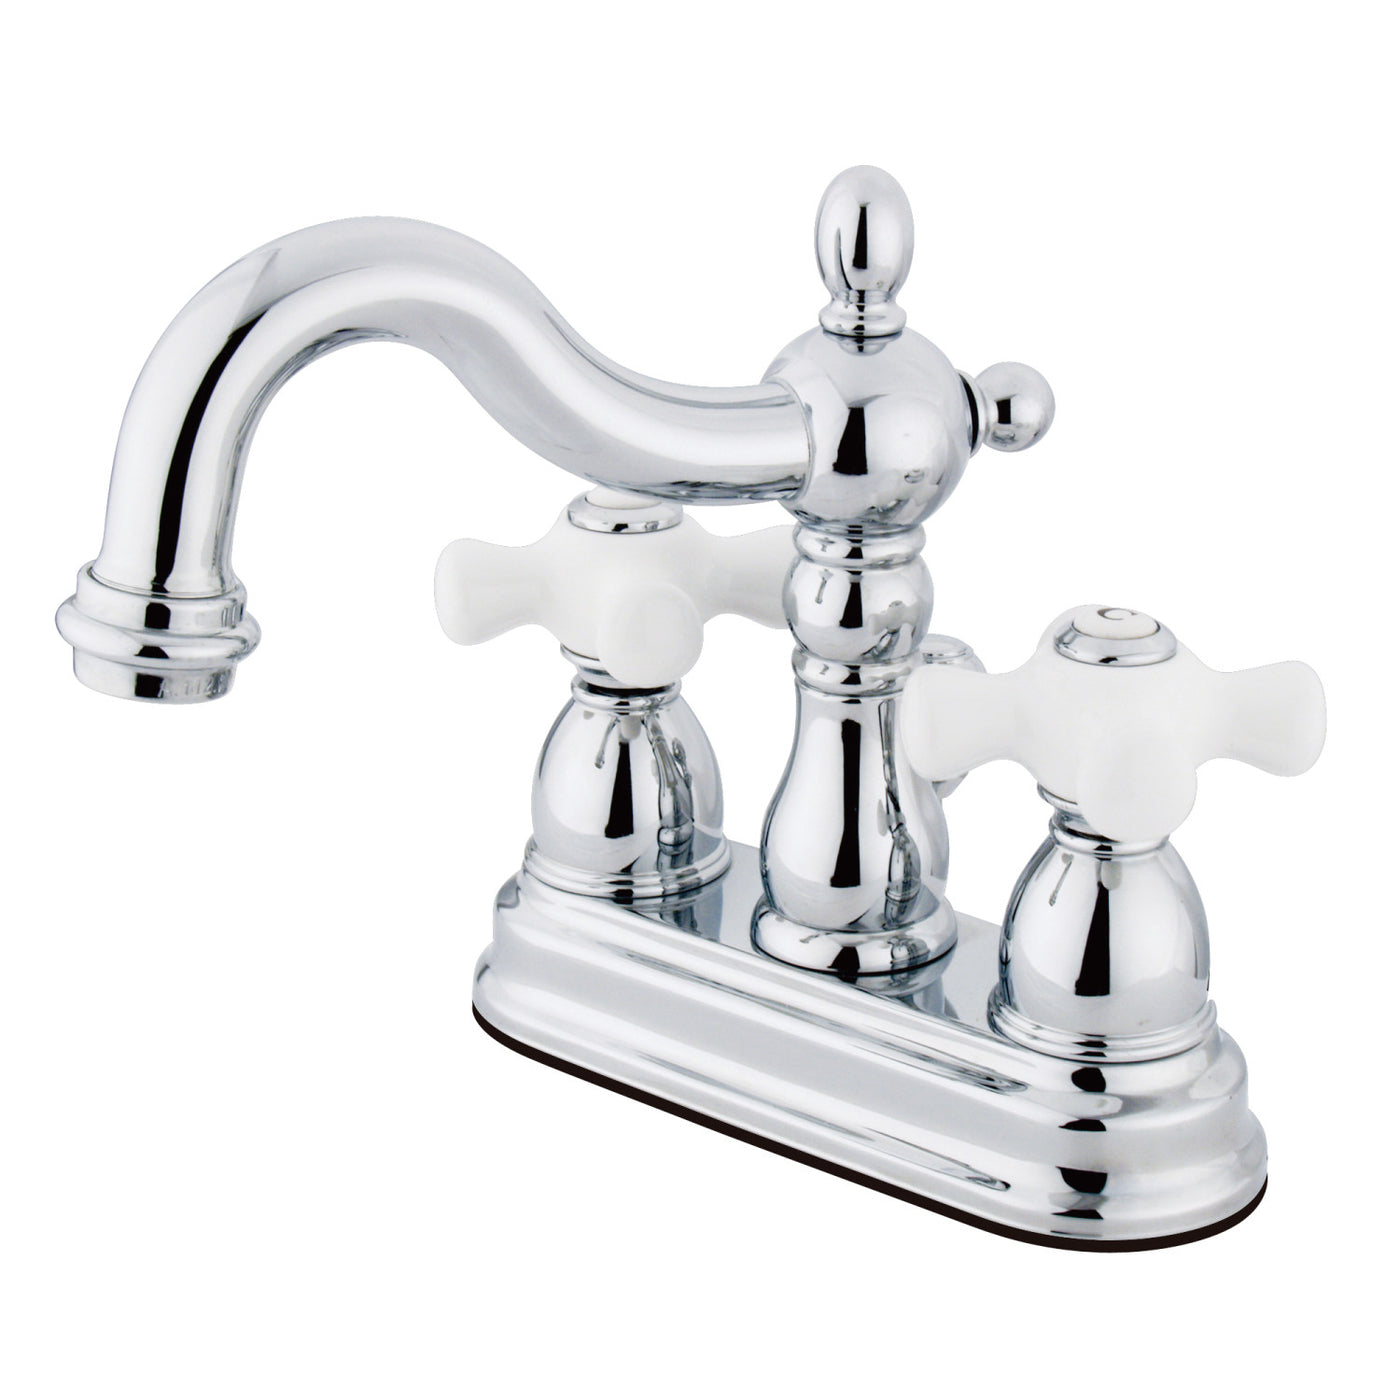 Elements of Design EB1601PX 4-Inch Centerset Bathroom Faucet with Plastic Pop-Up, Polished Chrome